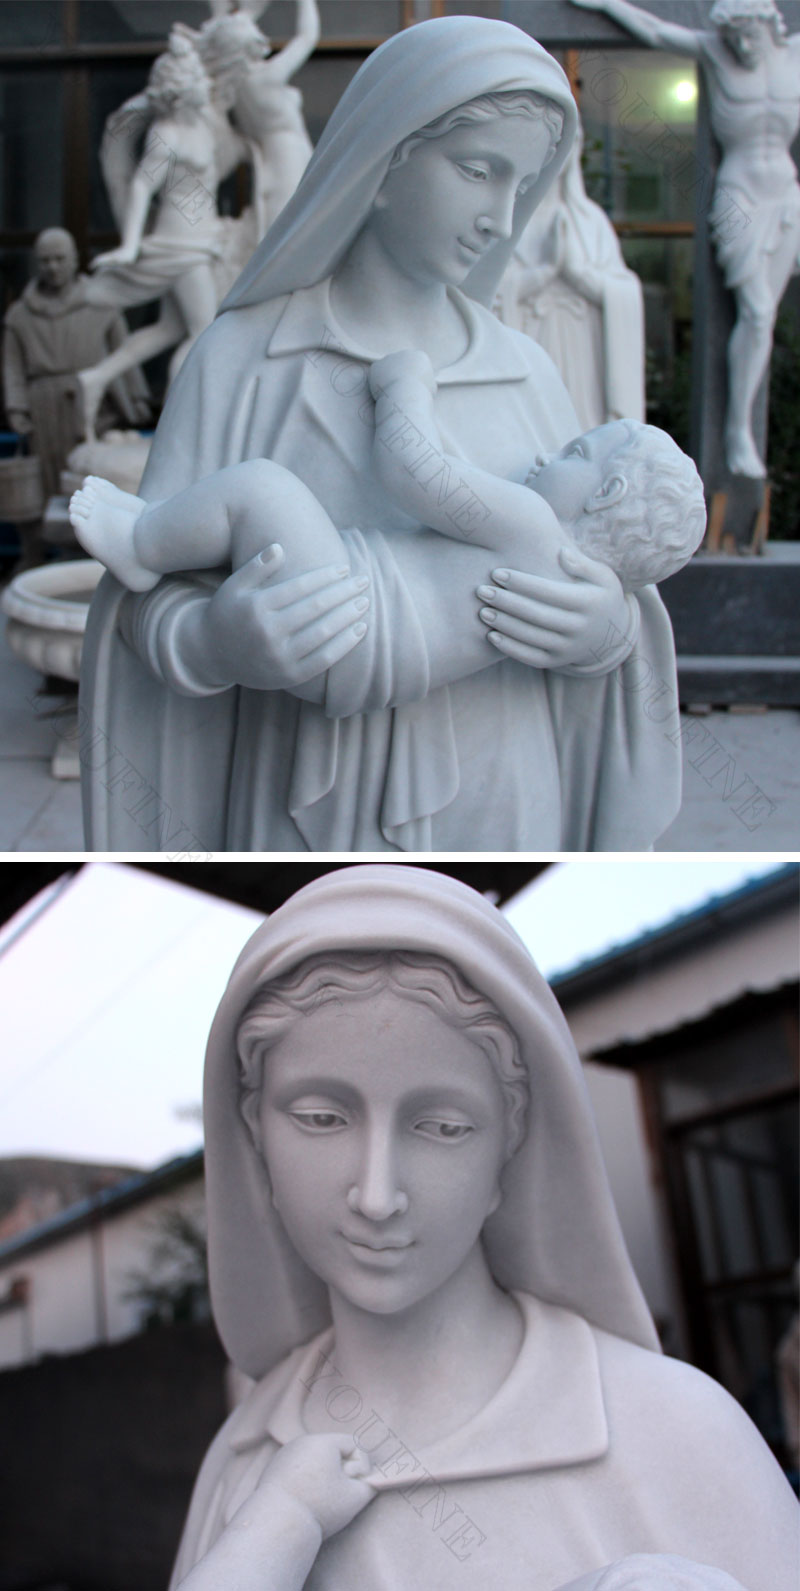 Mother virgin mary with baby jesus statues for church outdoor decor details